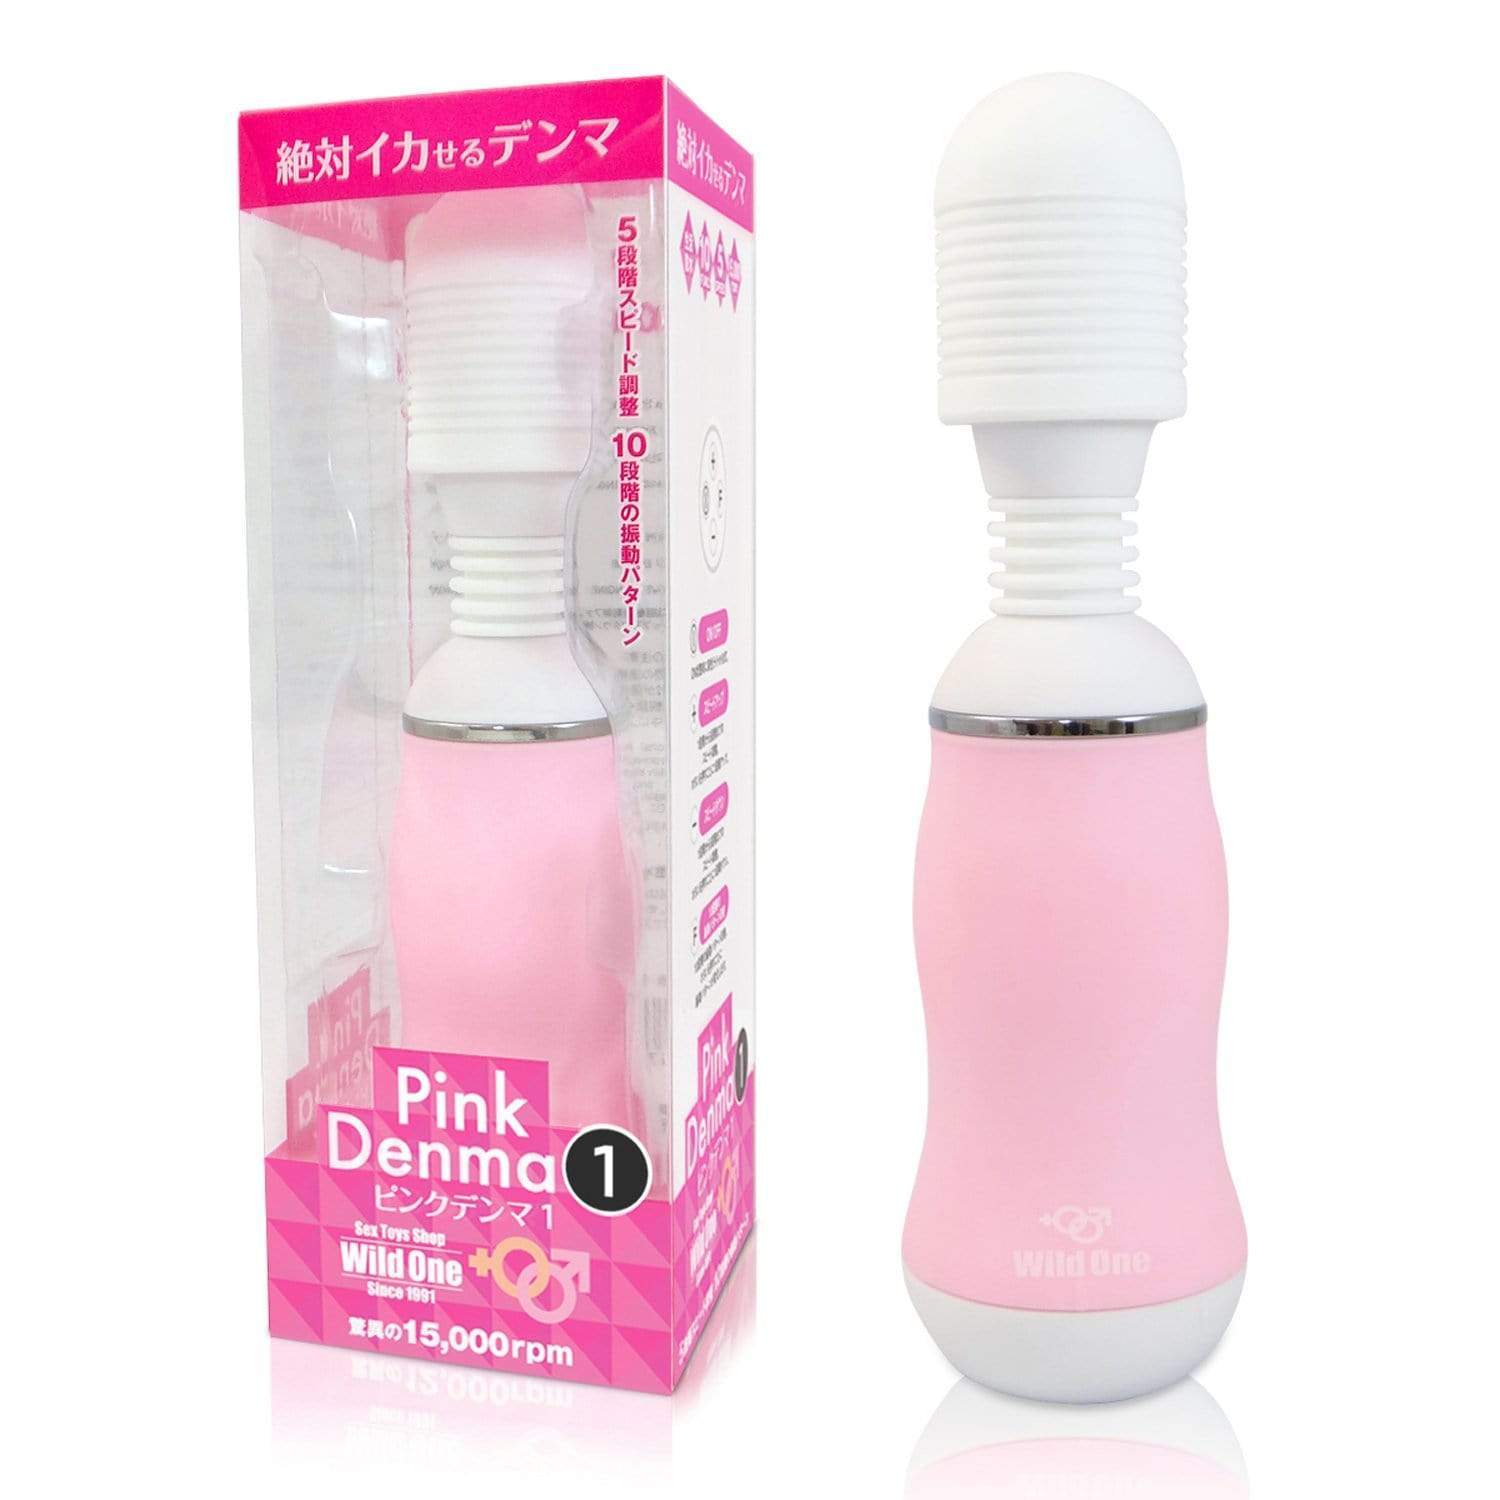 Wild One - Pink Denma 1 Wand Massager (Pink) -  Wand Massagers (Vibration) Non Rechargeable  Durio.sg